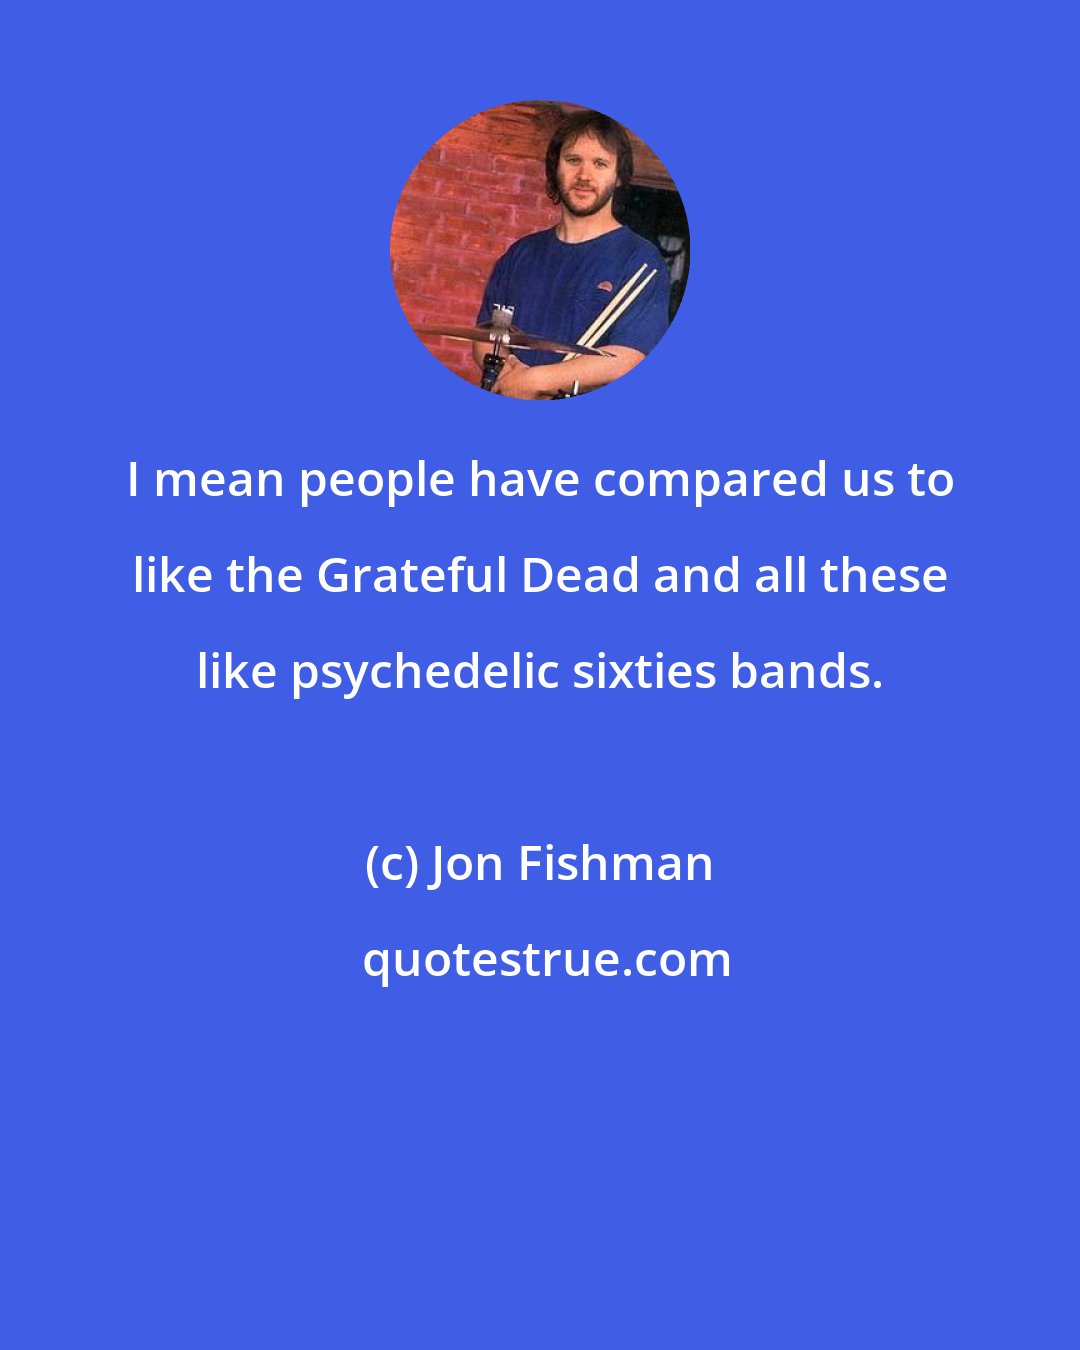 Jon Fishman: I mean people have compared us to like the Grateful Dead and all these like psychedelic sixties bands.